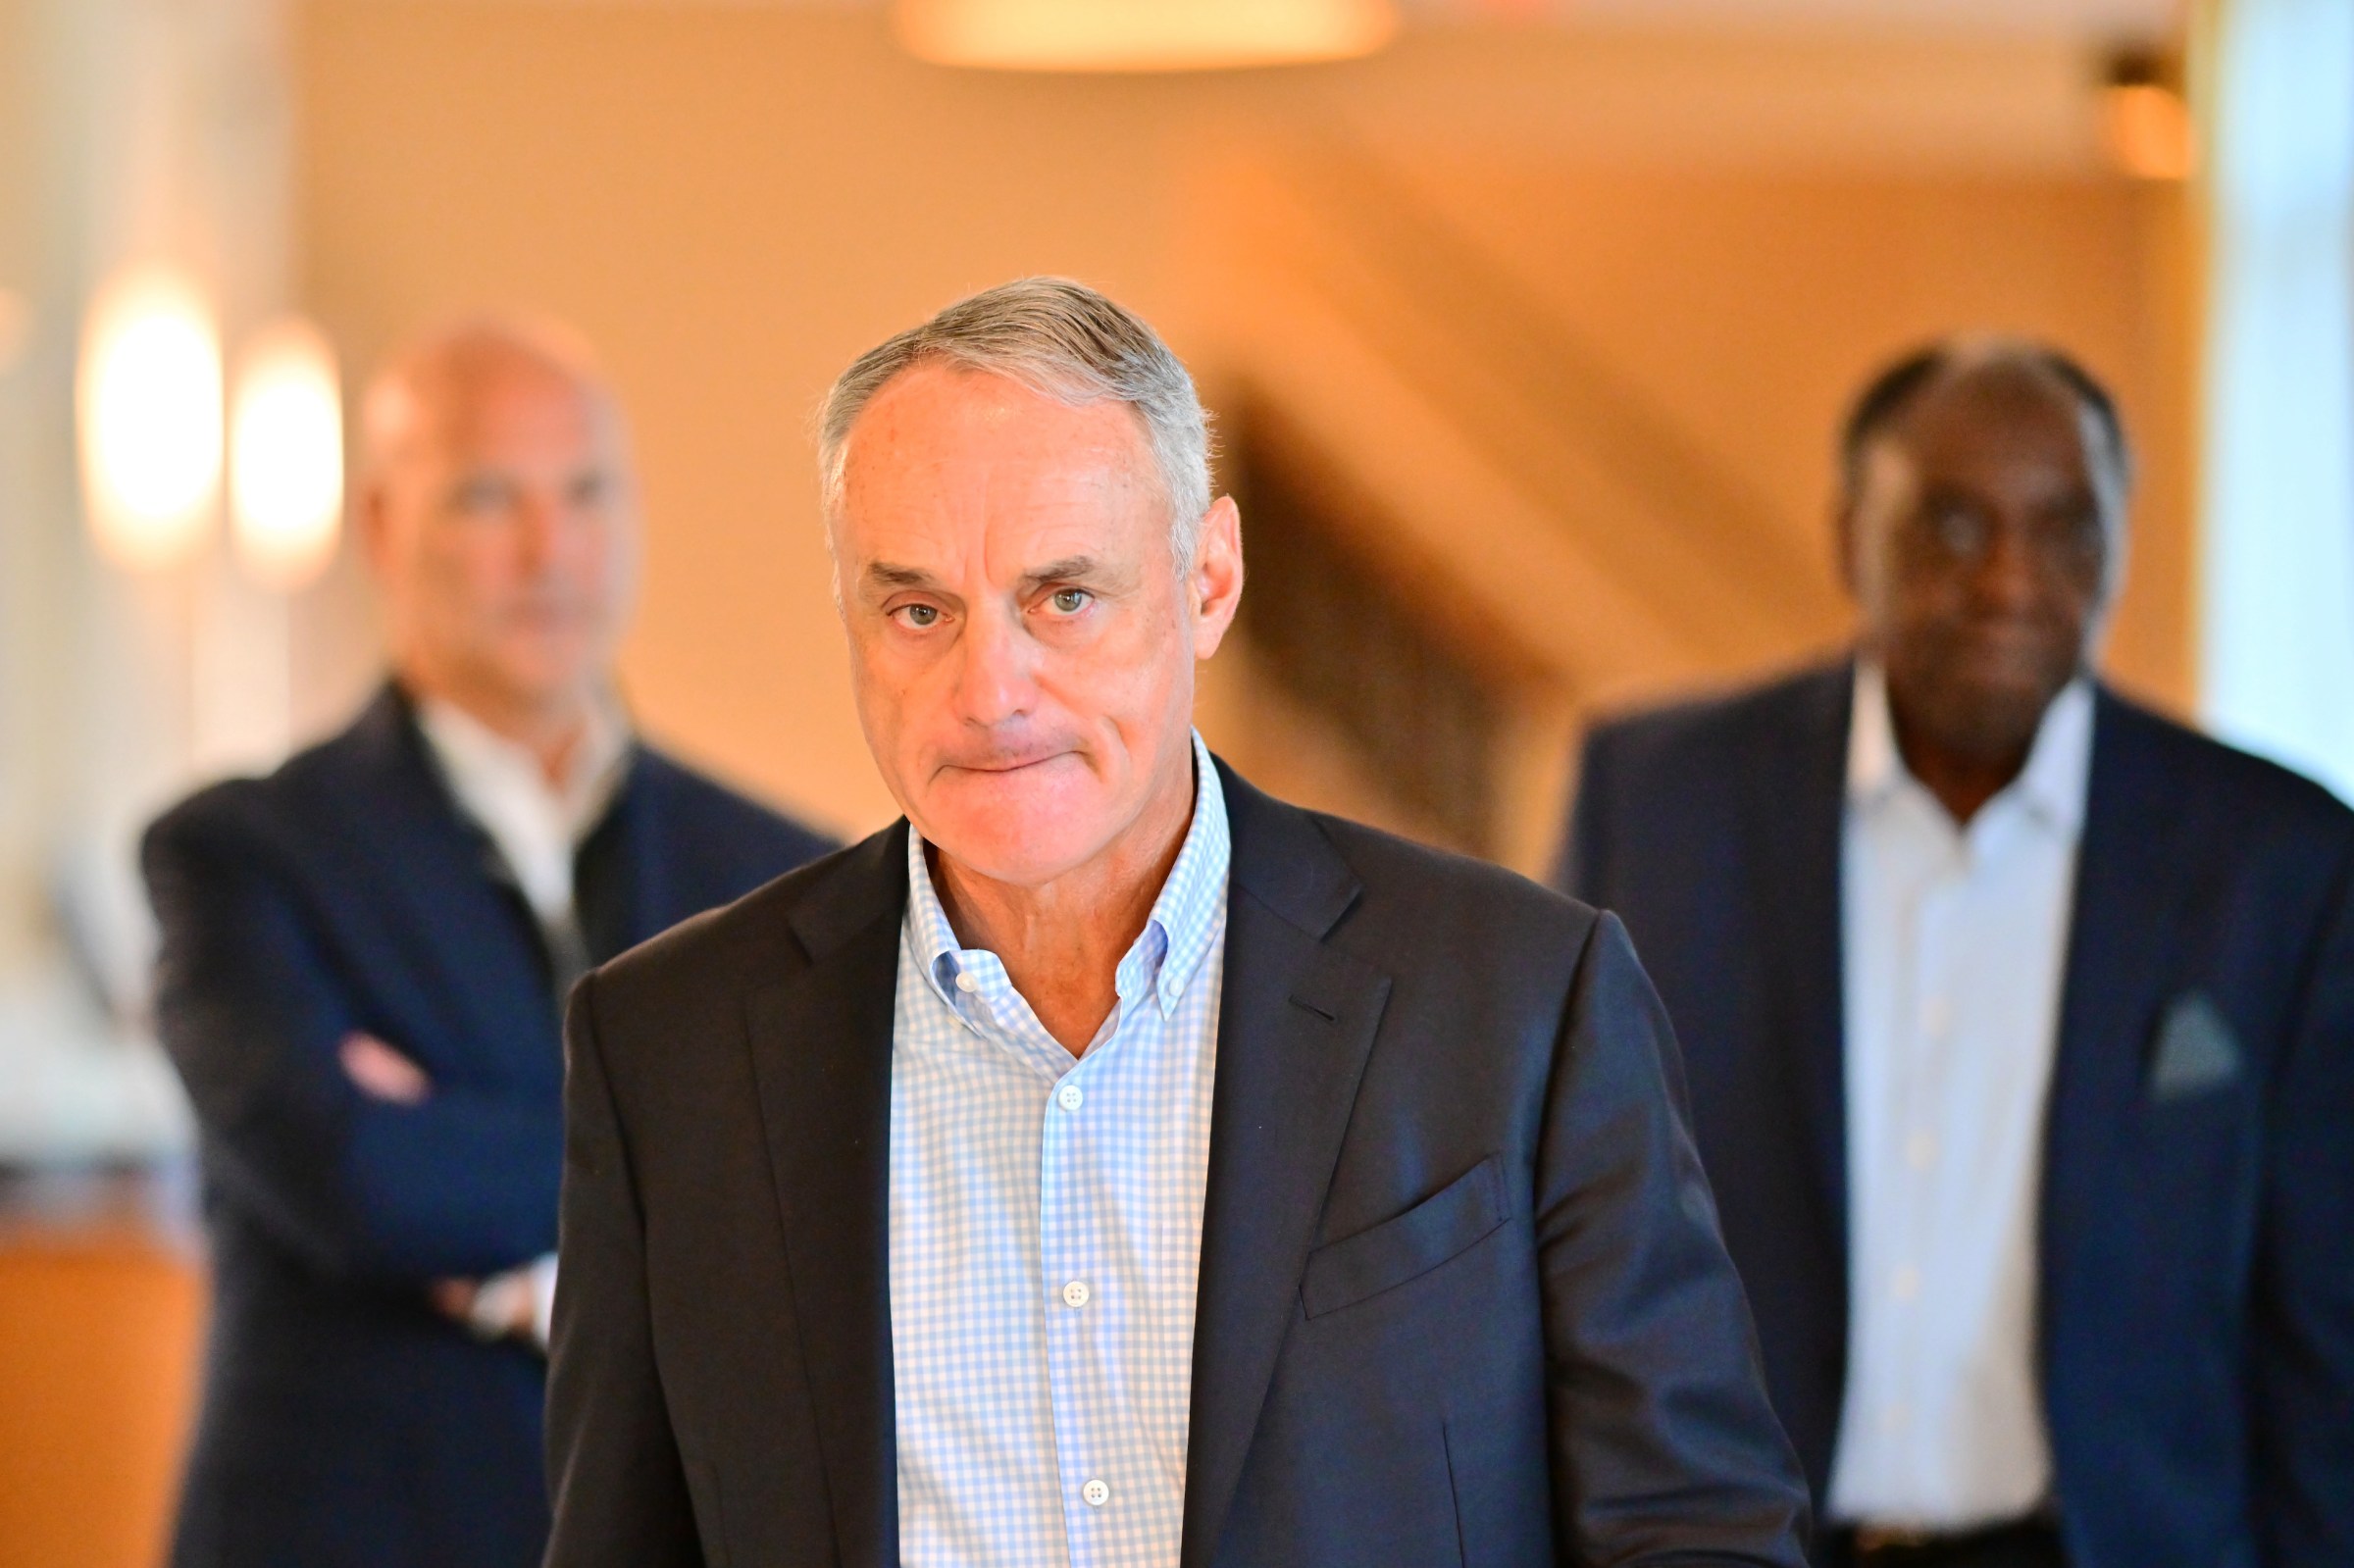 MLB commissioner Rob Manfred leaving the MLB owners meetings with that look on his face.